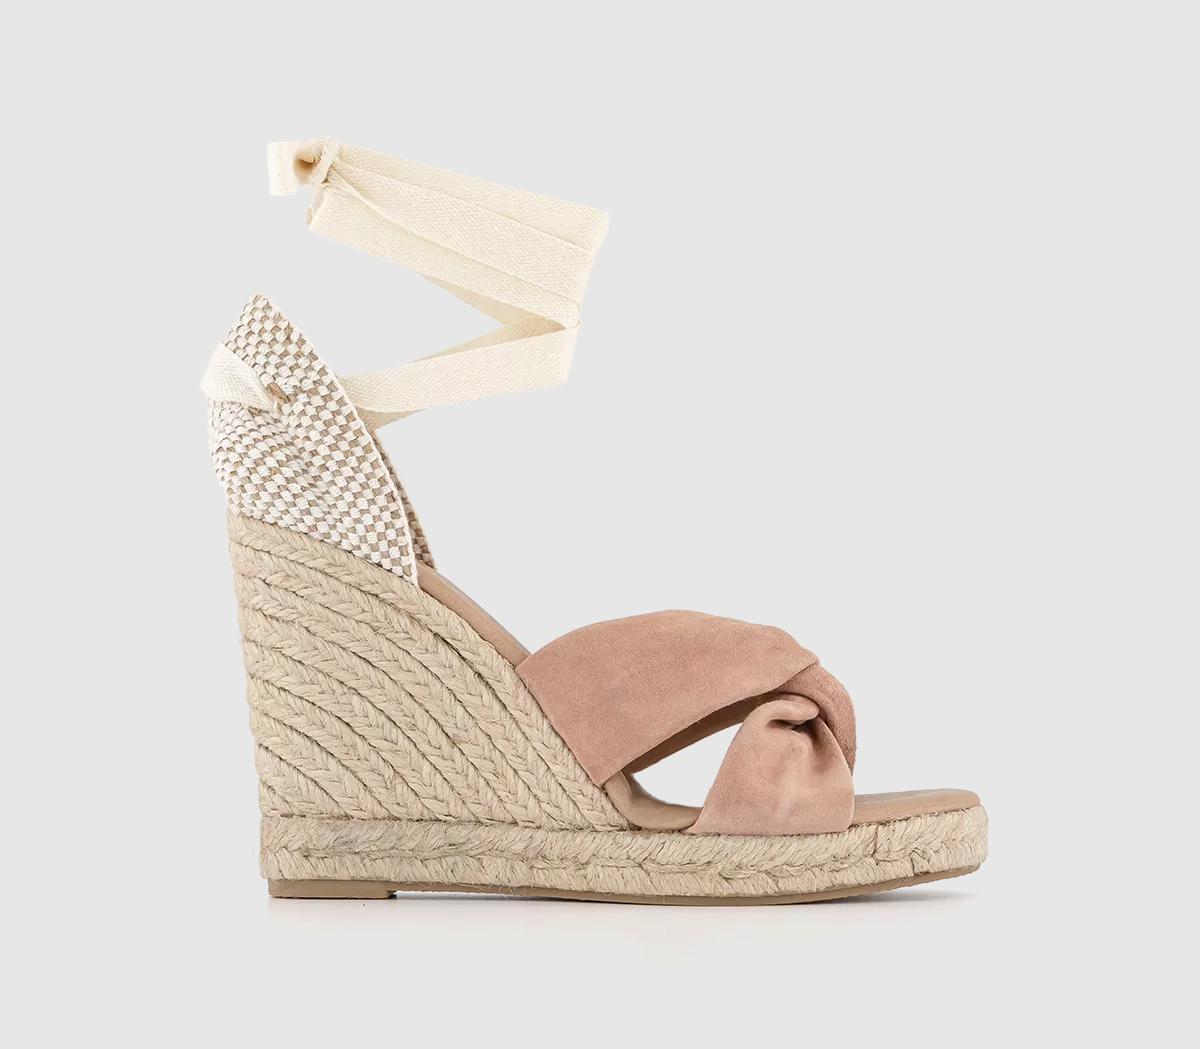 OFFICEHeather Ankle Tie EspadrillesBlush Suede